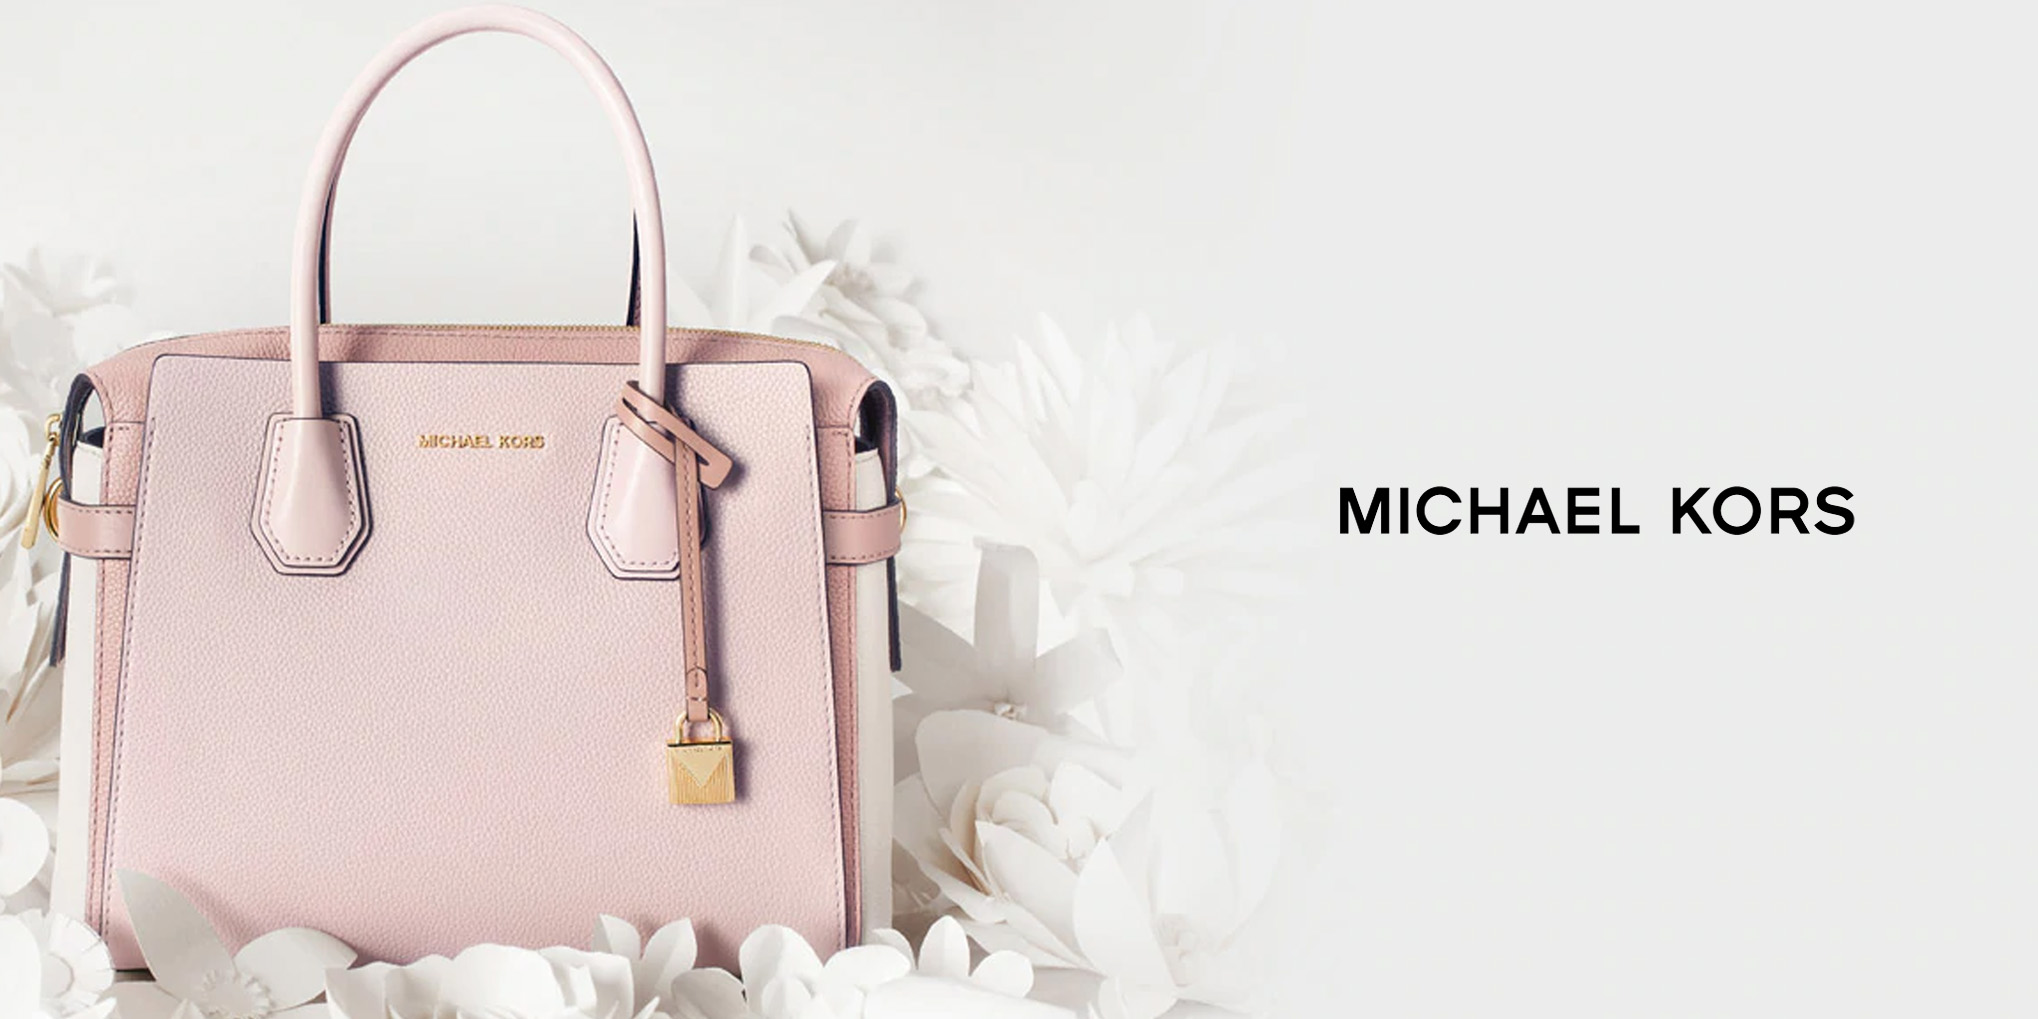 Michael Kors Mother's Day Sale offers 25% off handbags, smart watches &  more + free shipping